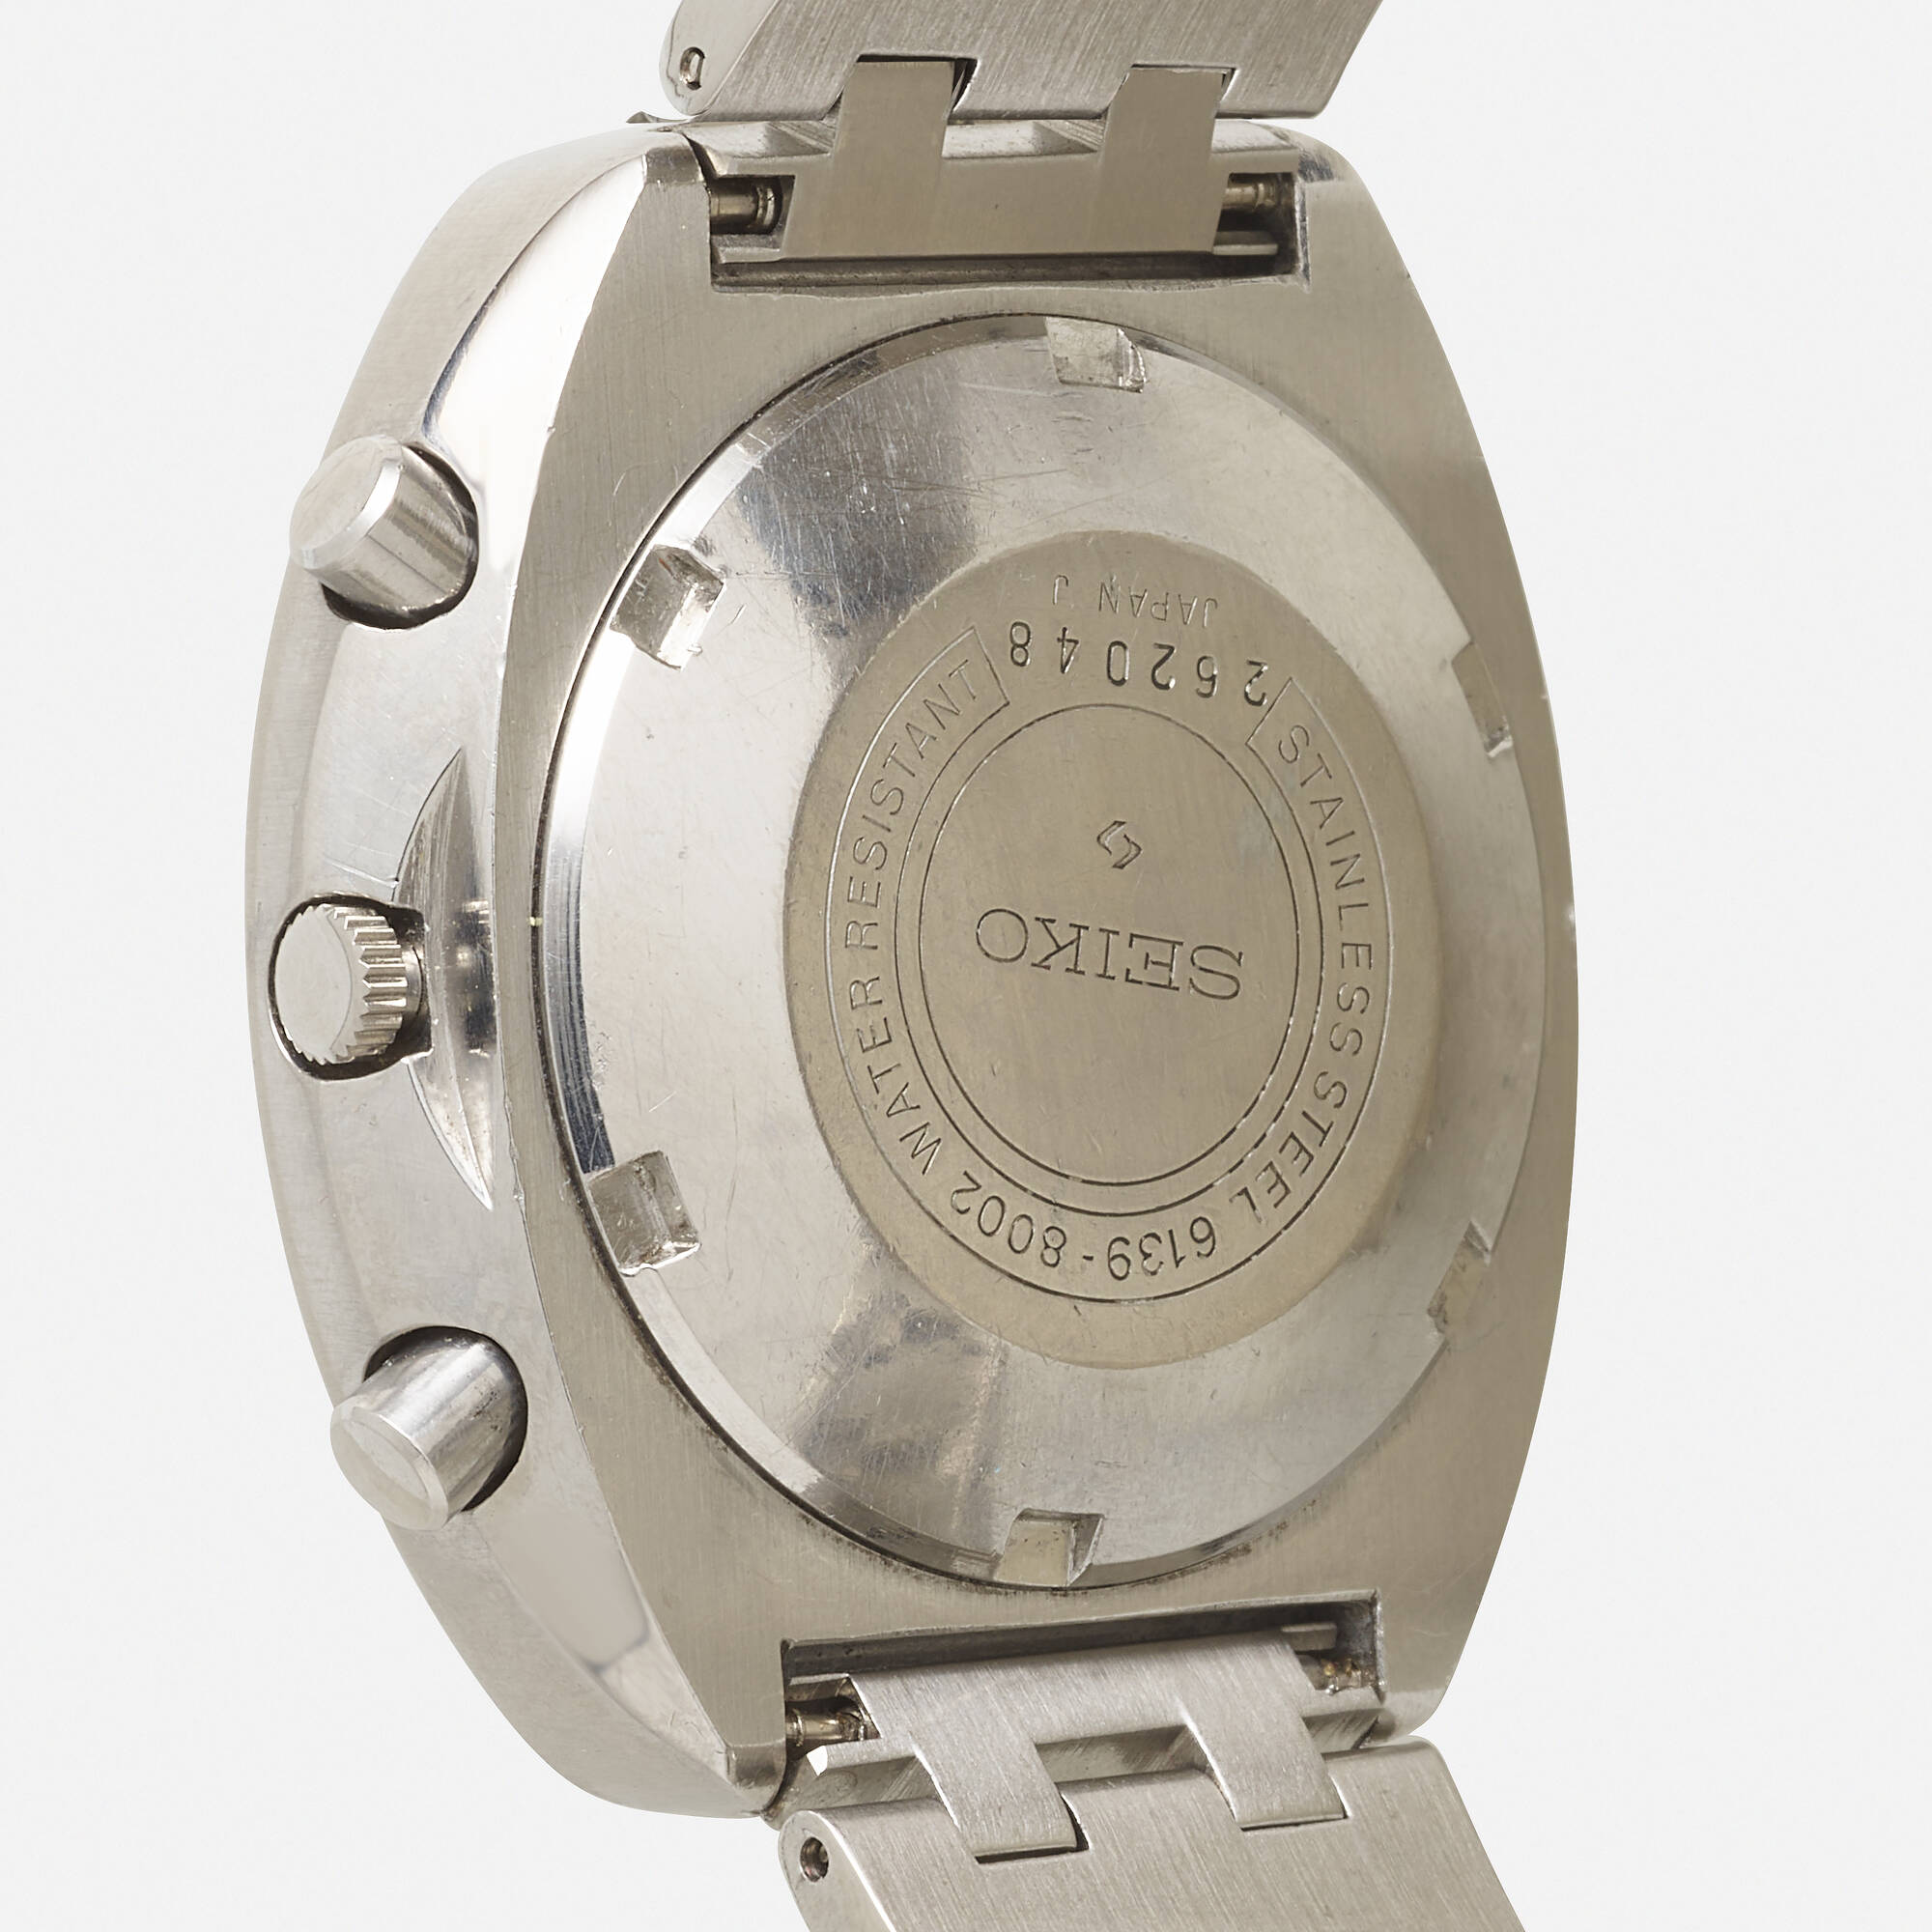 135: SEIKO FROM ANDREW PEREZ, 'Speedtimer' stainless steel wristwatch <  Watches including the Brian LaViolette Scholarship Foundation Benefit Lots,  30 November 2022 < Auctions | Wright: Auctions of Art and Design